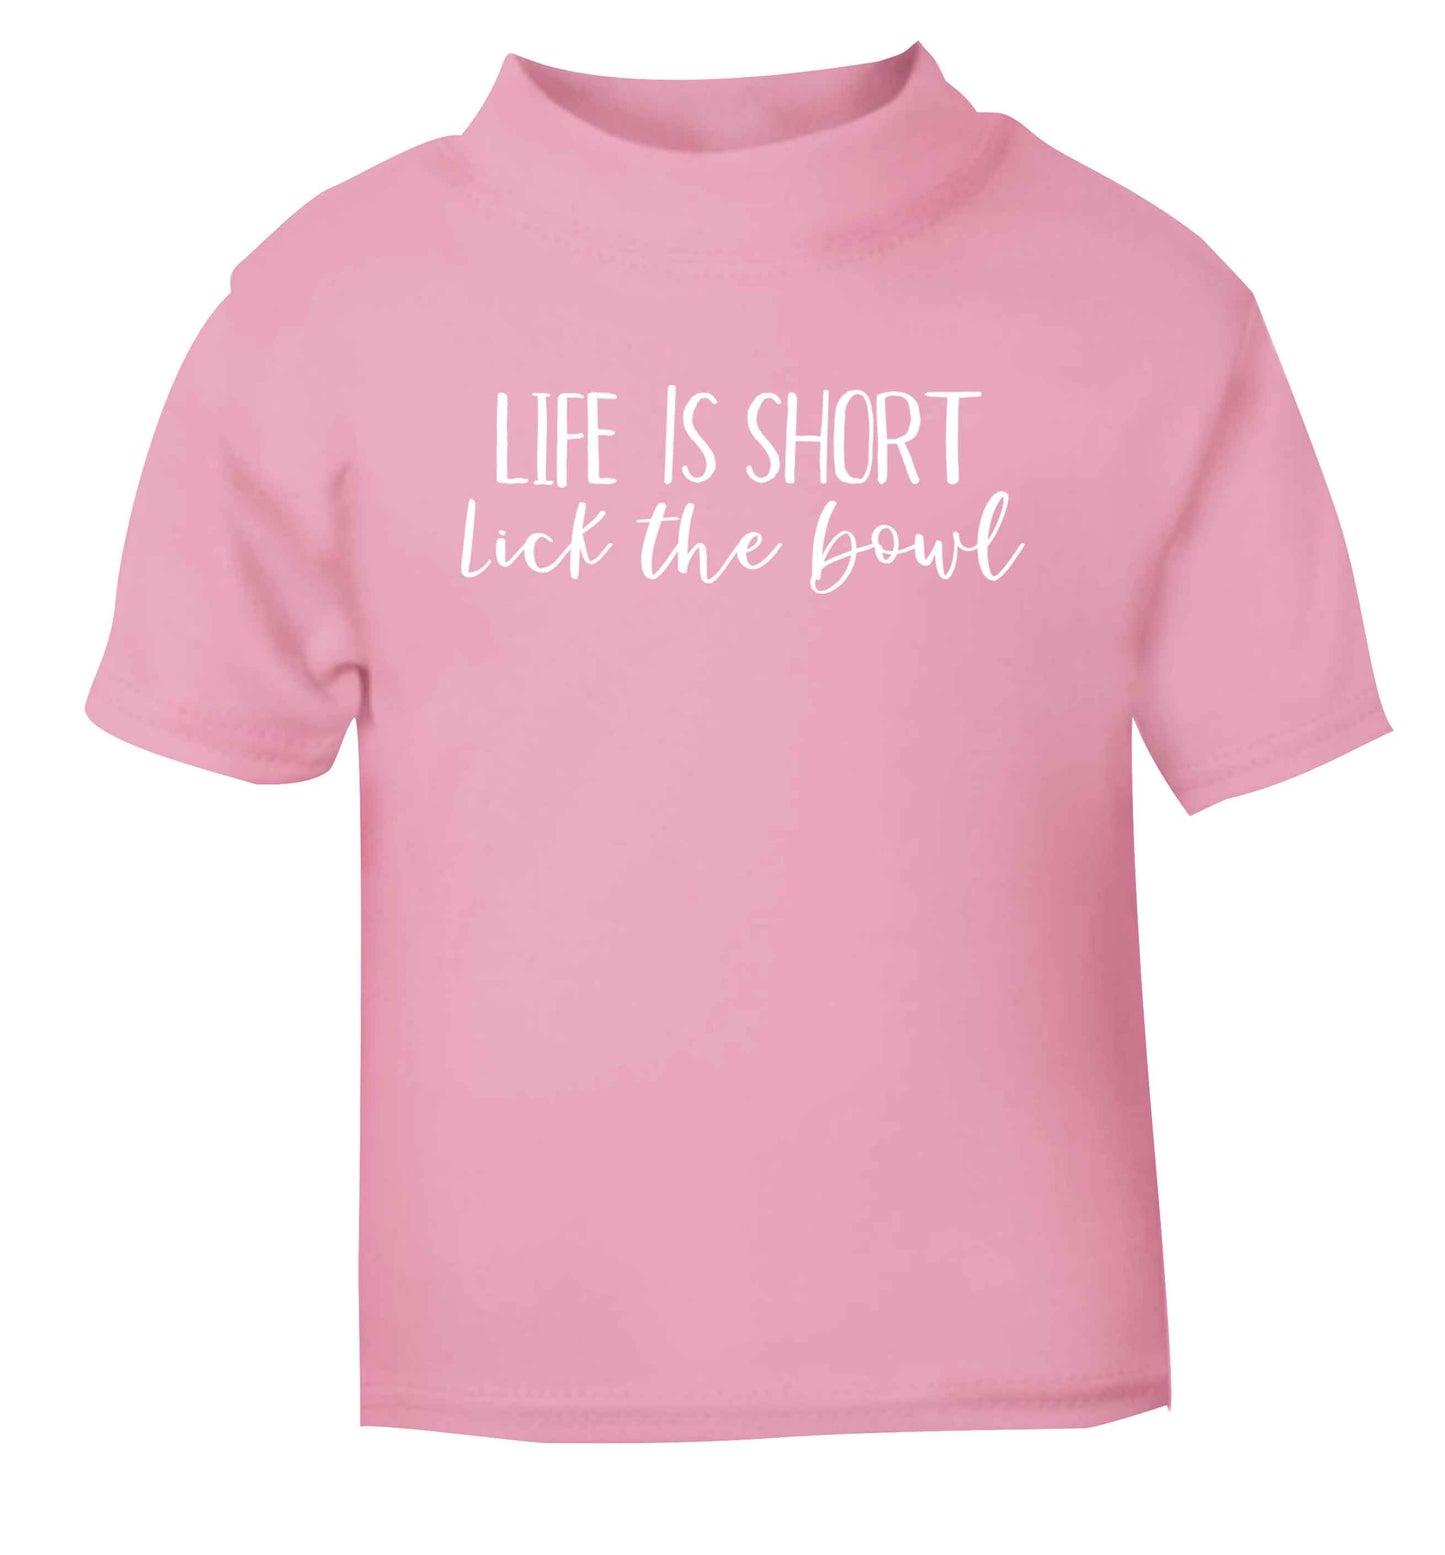 Life is short lick the bowl light pink Baby Toddler Tshirt 2 Years